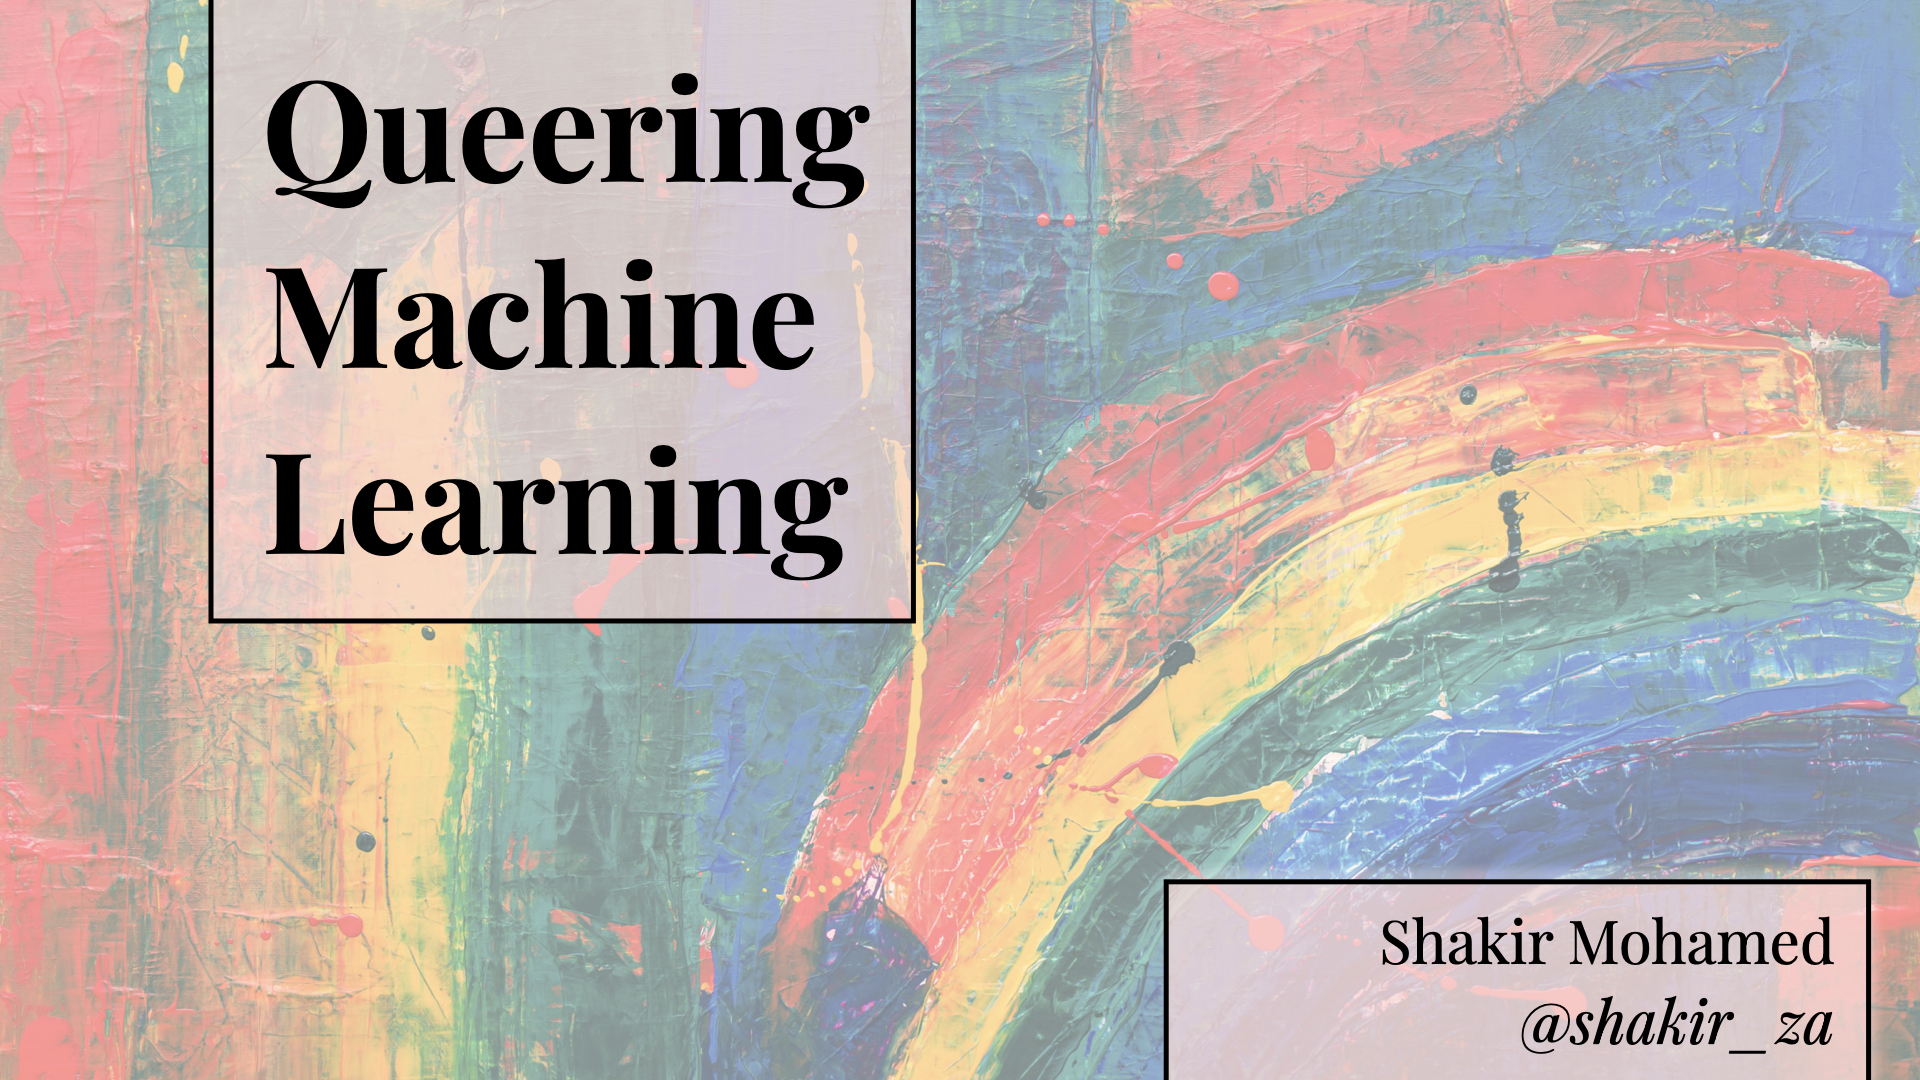 Queering Machine Learning